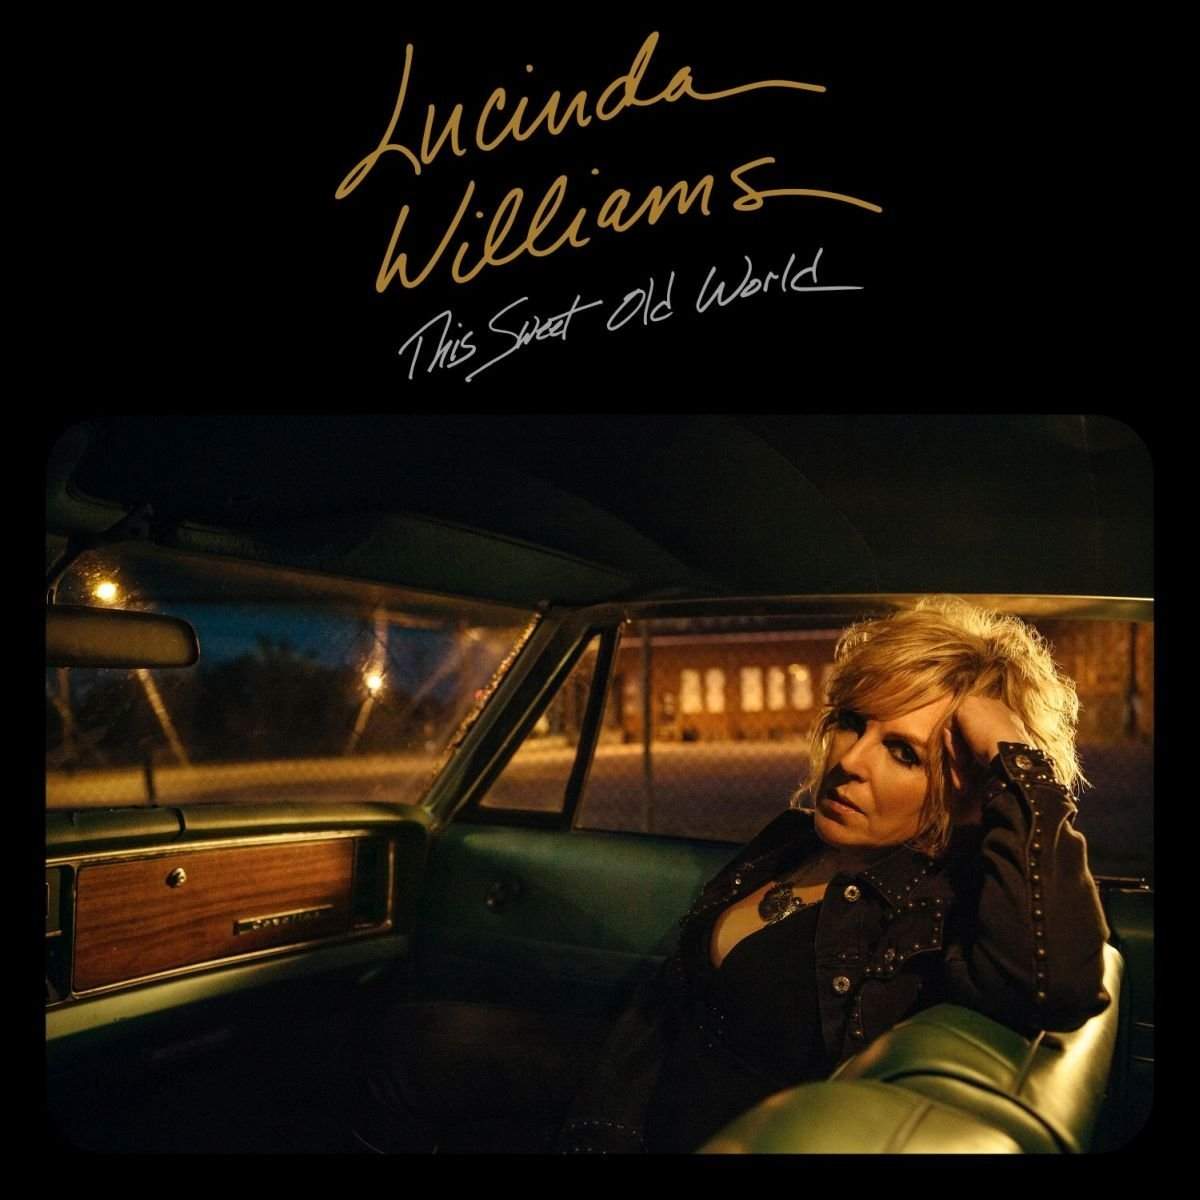 This Sweet Old World by Lucinda Williams